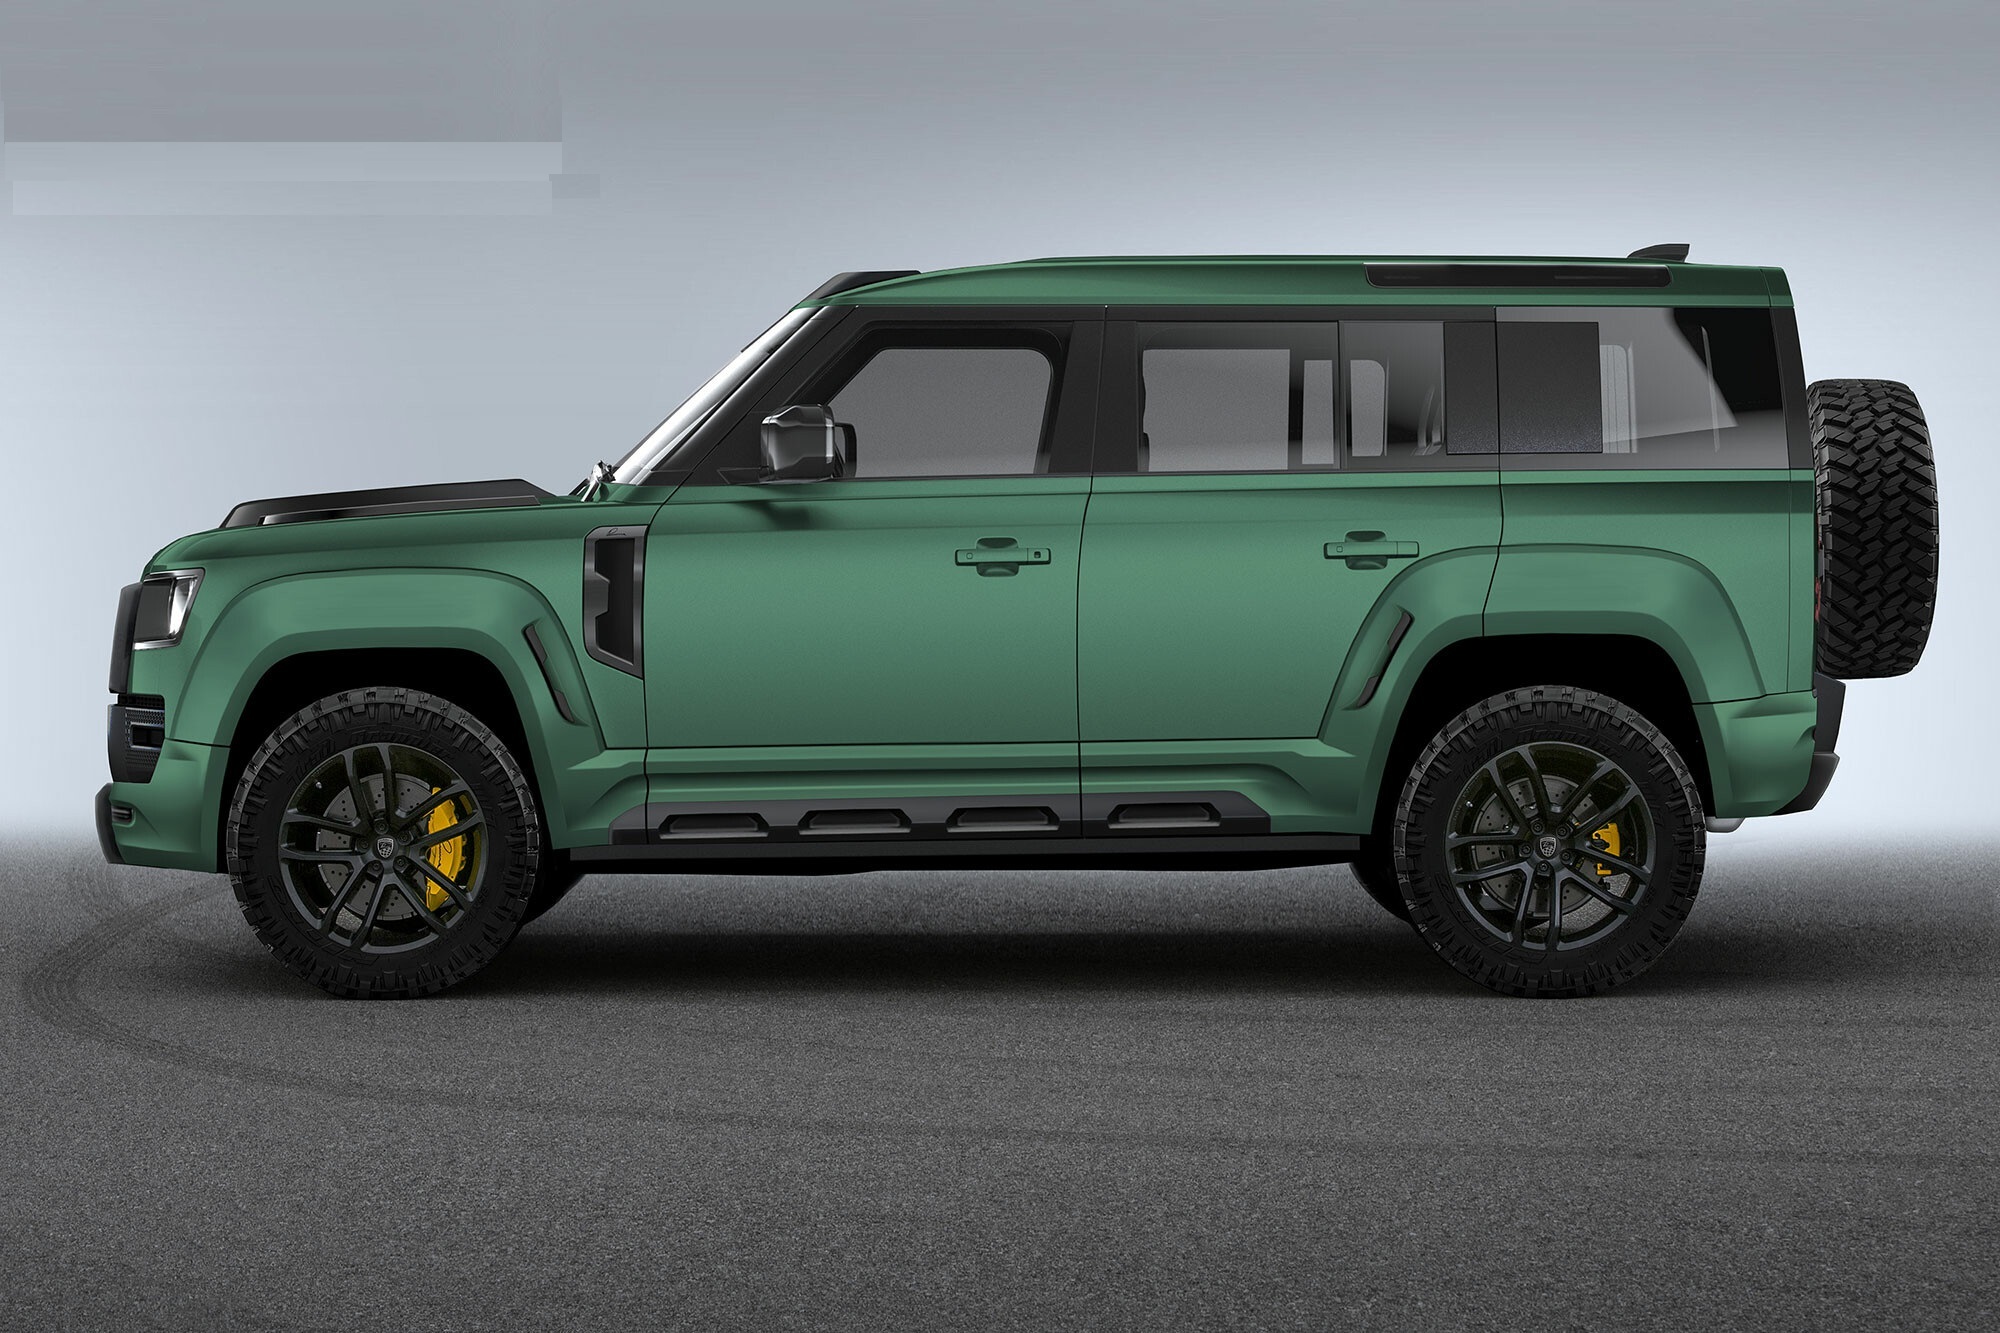 Check price and buy Lumma CLR LD body kit for Land Rover Defender